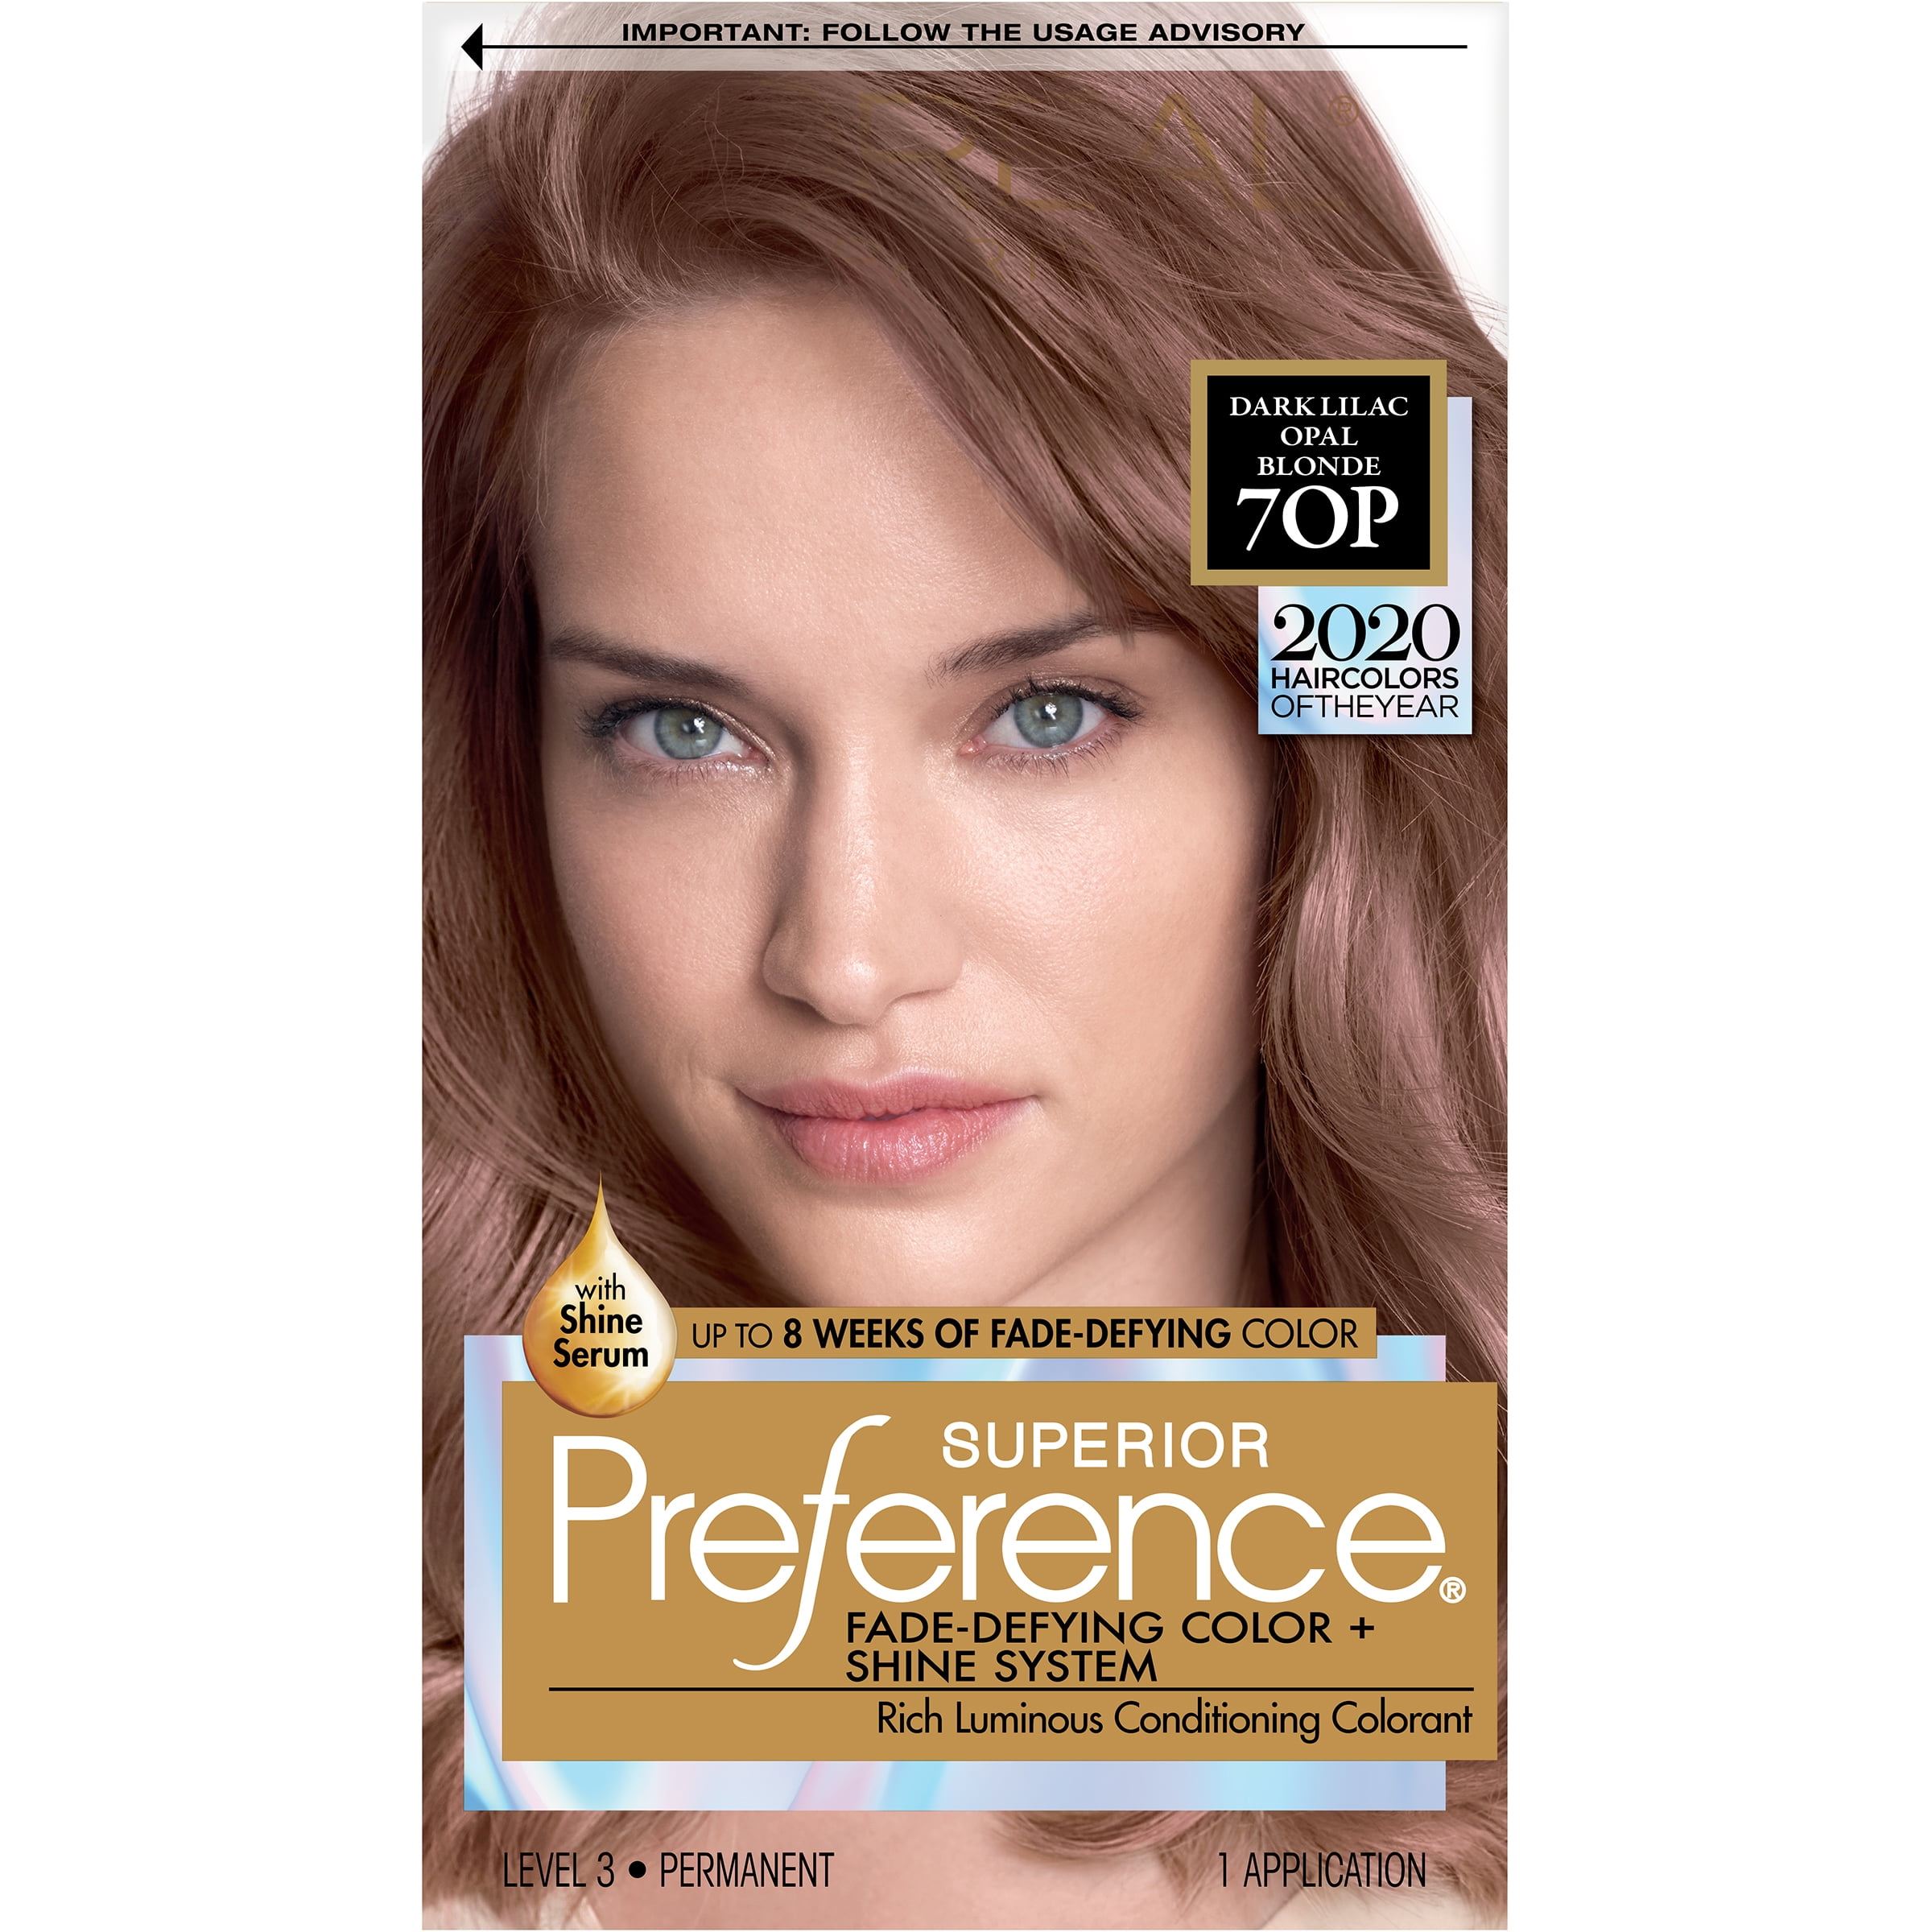 L'Oreal Paris Superior Preference Fade-Defying Shine Permanent Hair Color,  70P Light Lilac Opal Brown, 1 kit 